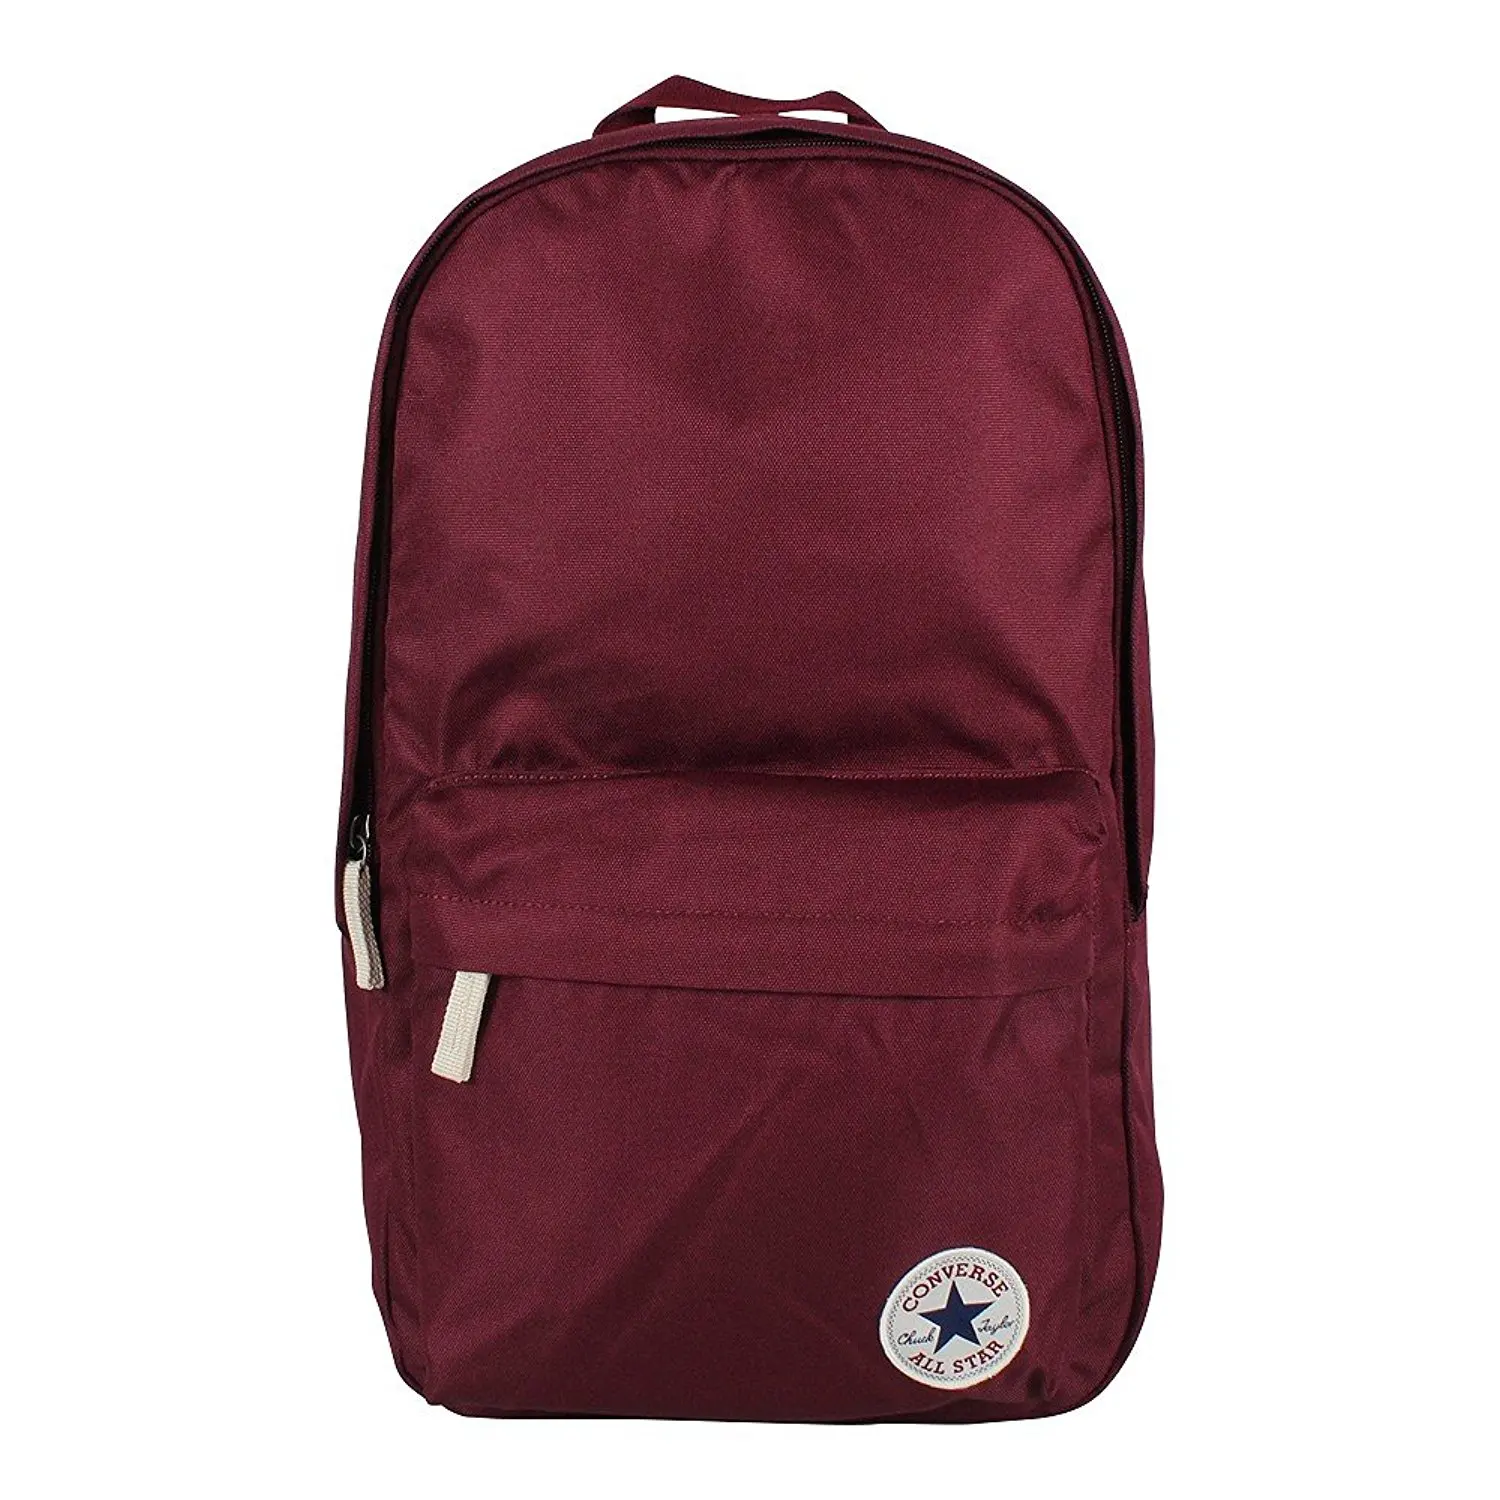 converse core backpack